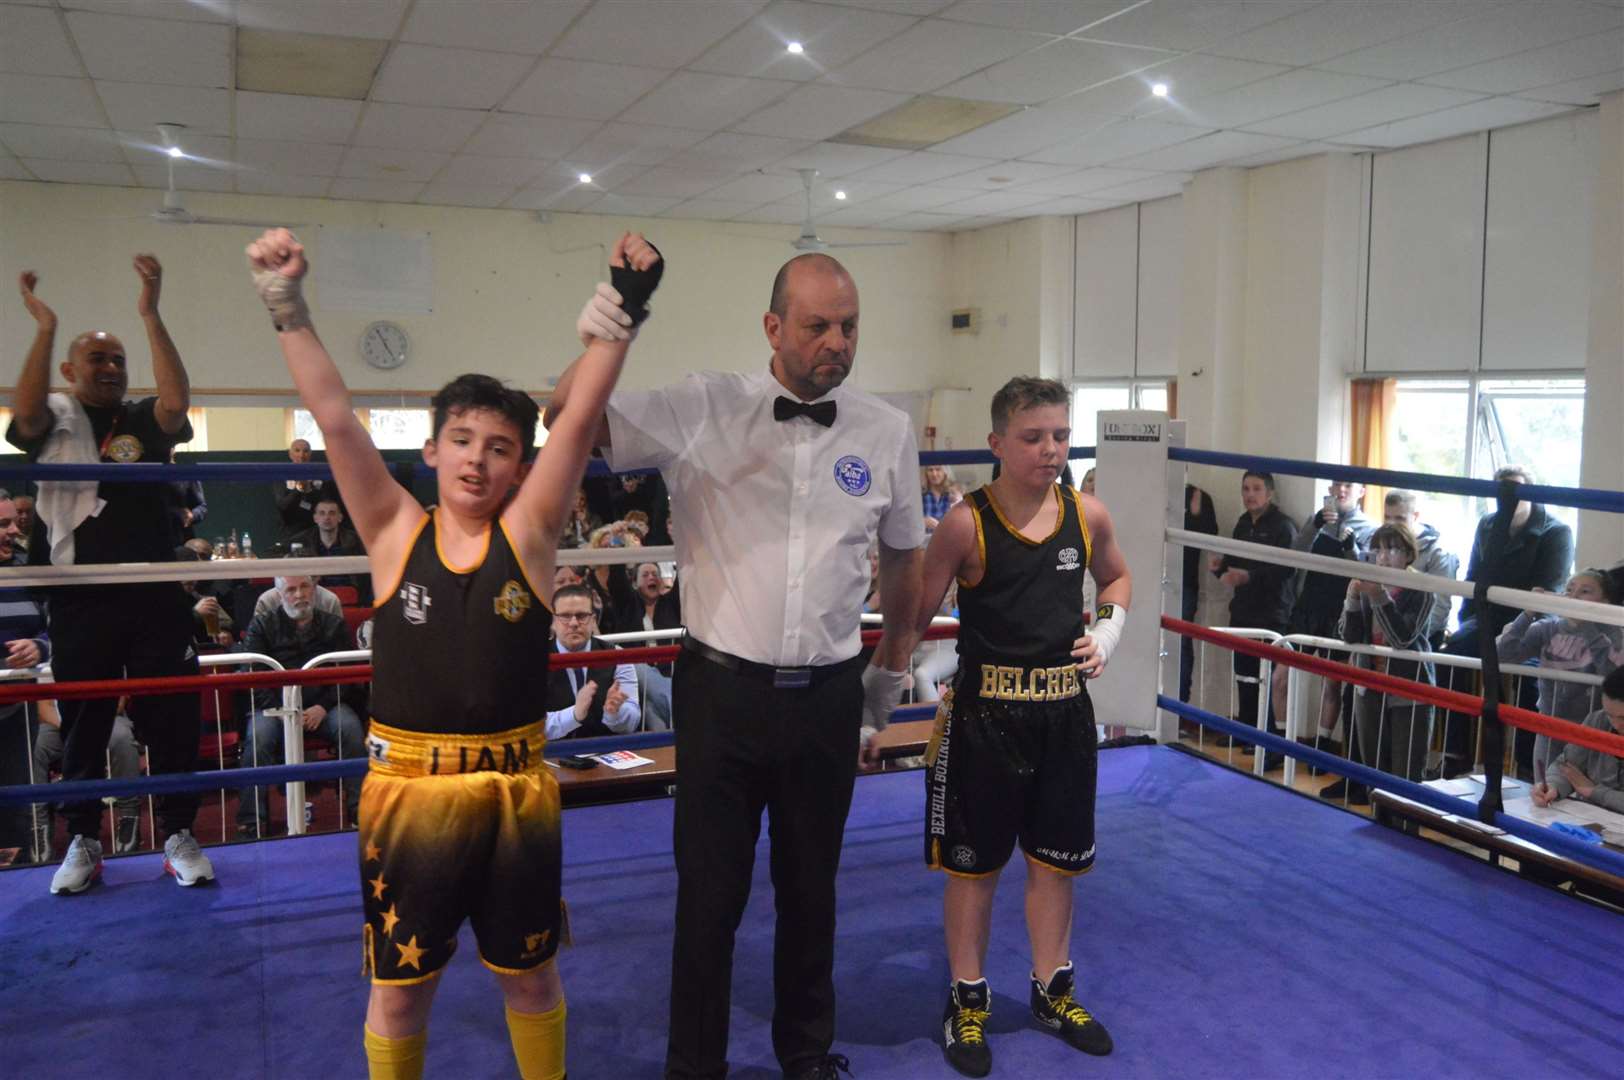 Boxer Liam Evans had been competing for four years and had an upcoming fight